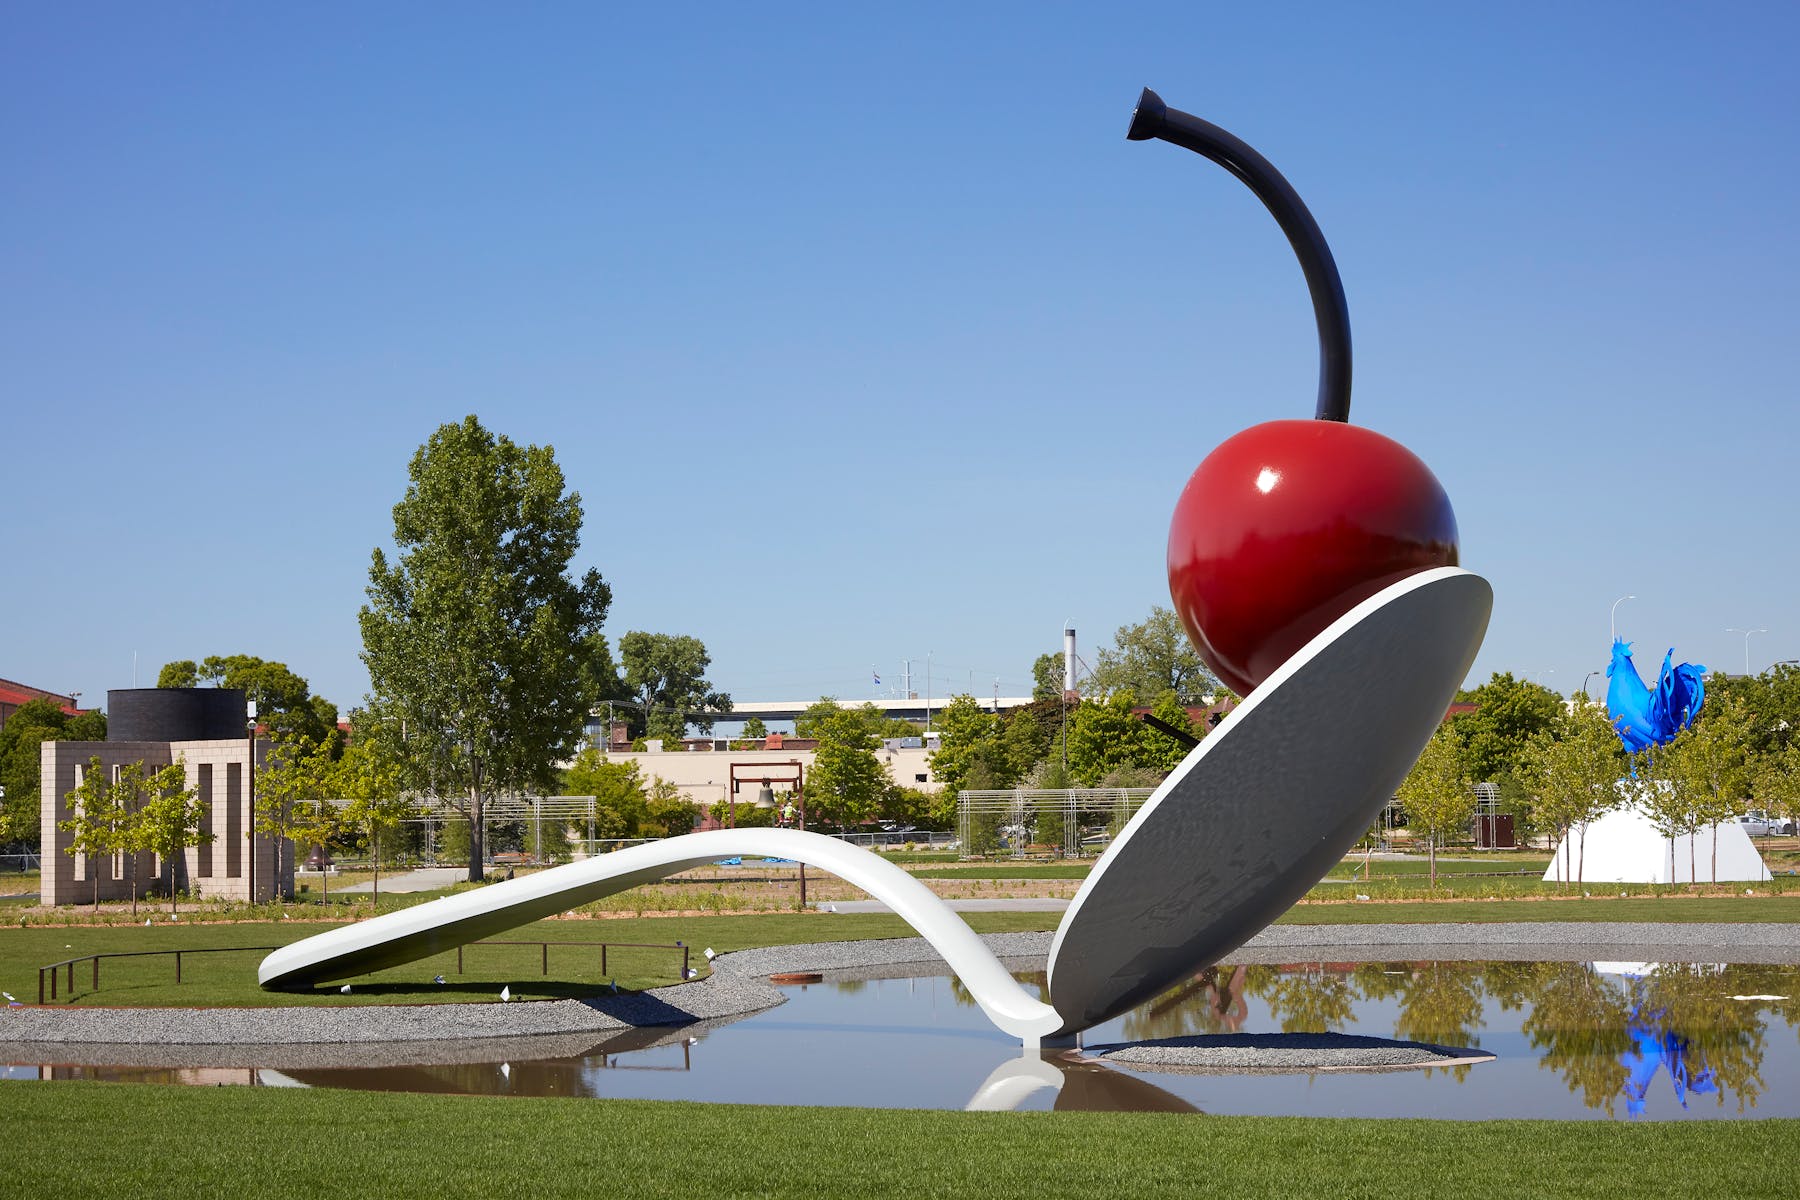 Large sculpture of red cherry balancing on tip of white spoon, above small pond, with sculptures and trees in the background